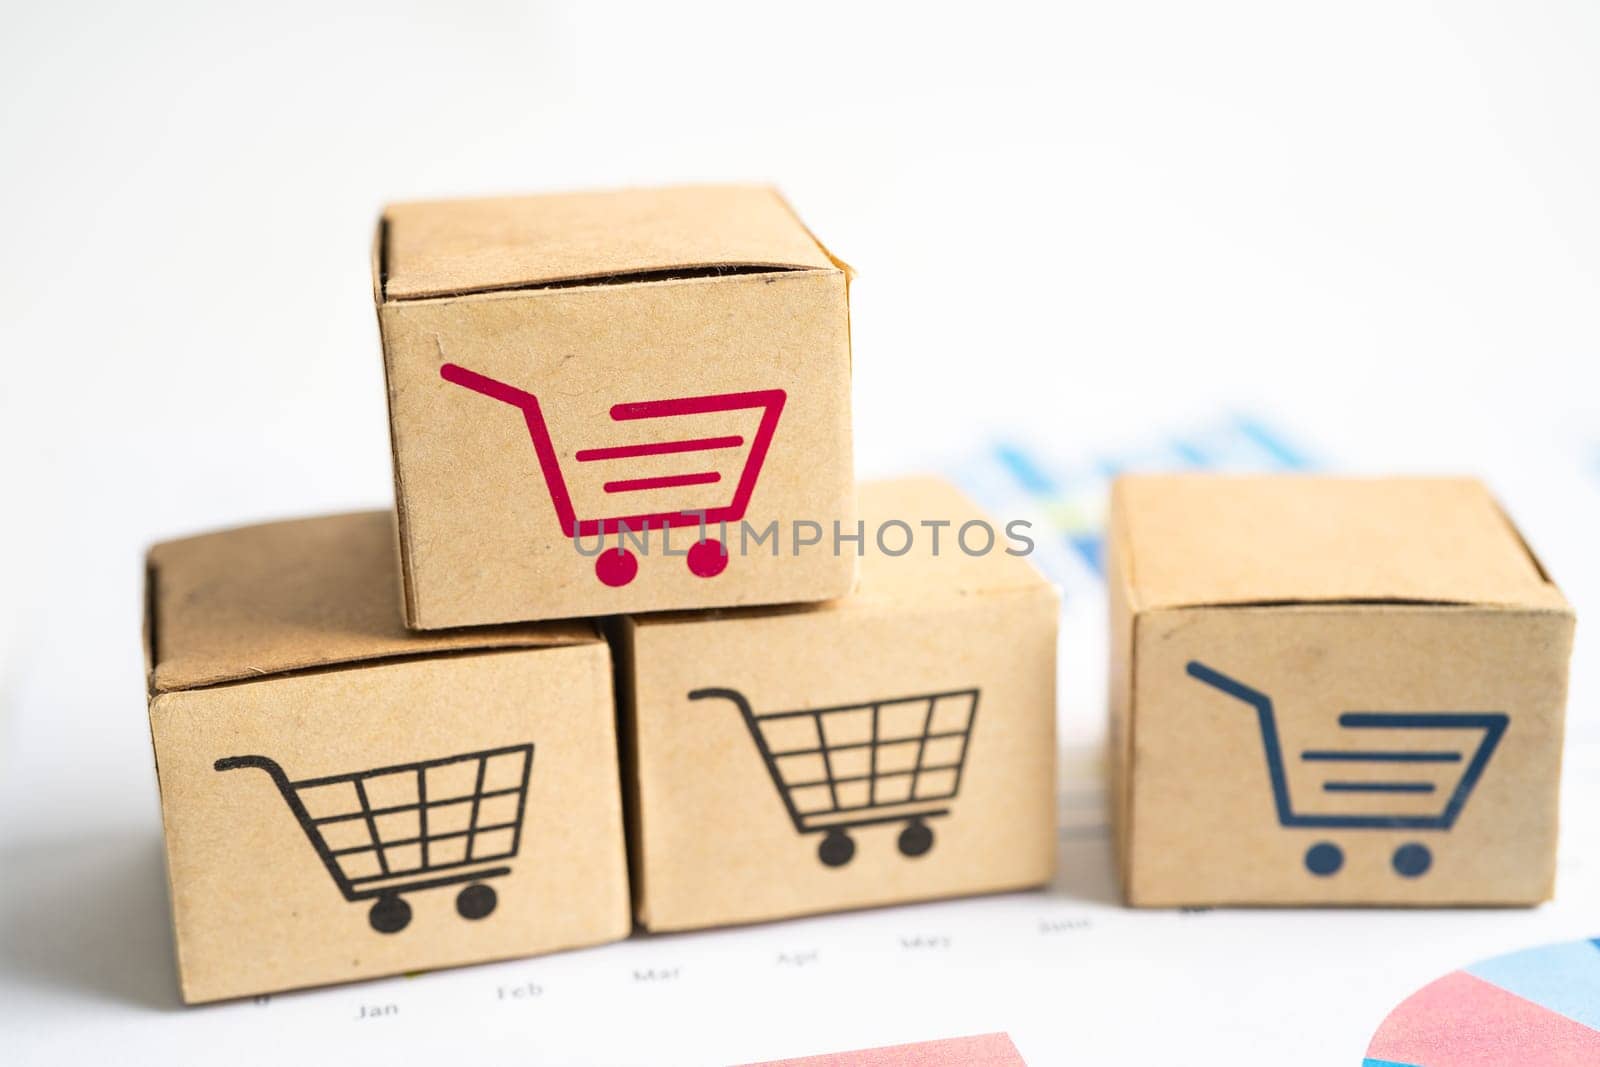 Shopping cart logo on box on graph background. Banking Account, Investment Analytic research data economy, trading, Business import export transportation online company concept. by pamai